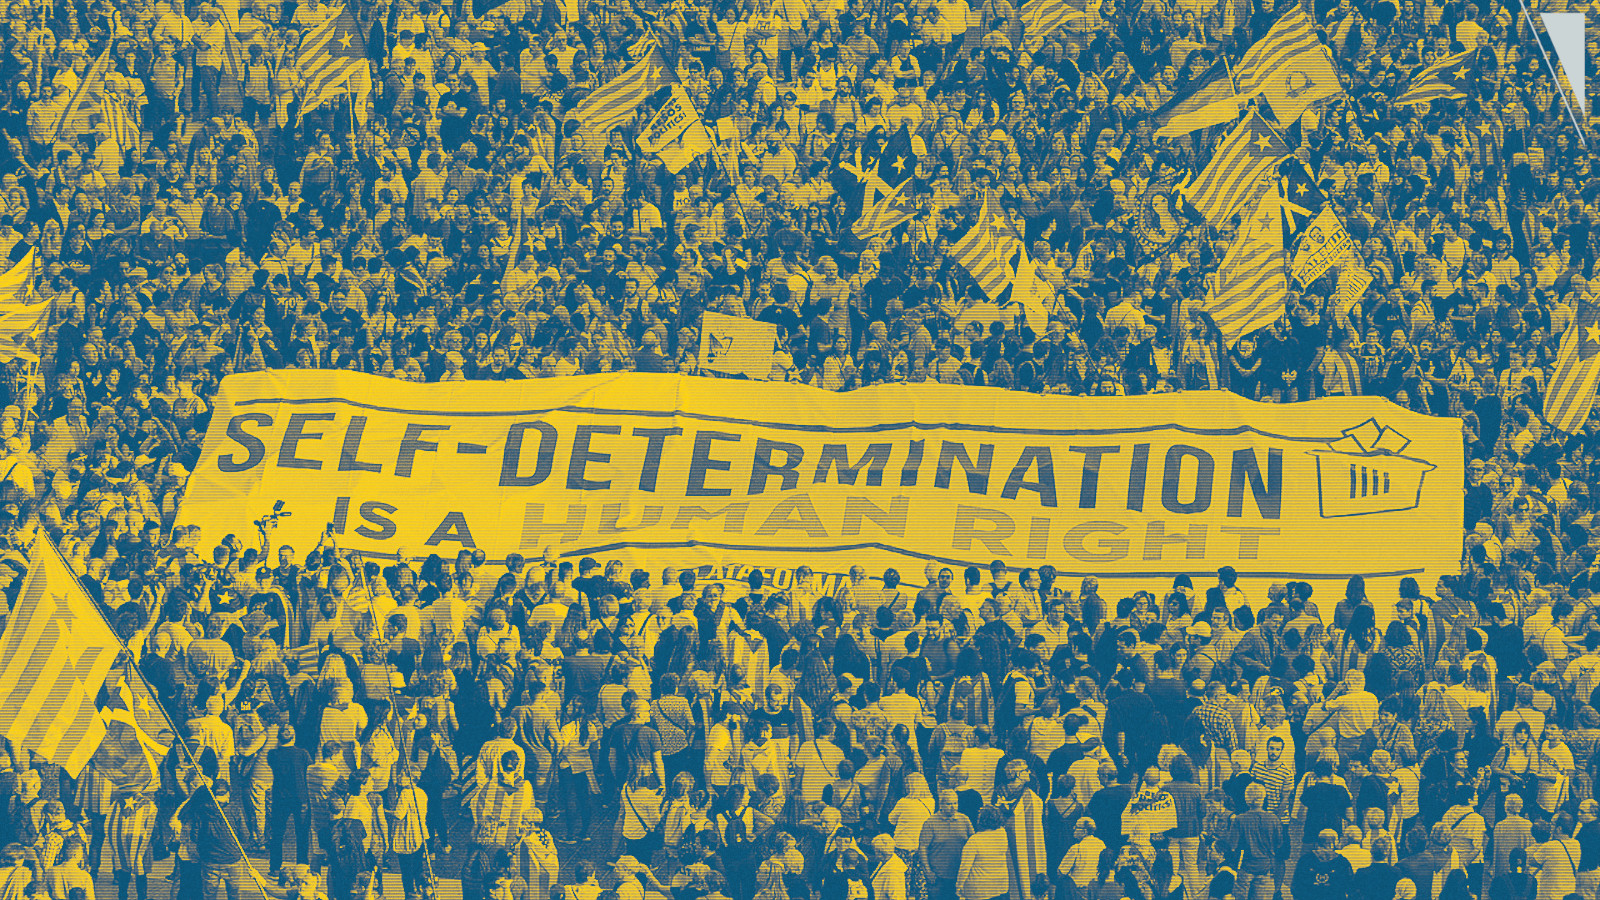 Feature art from Tempest article “Did Lenin create Ukraine?” showing a mass mobilization, with many flags and an enormous banner stating, “self-determination is a human right.”